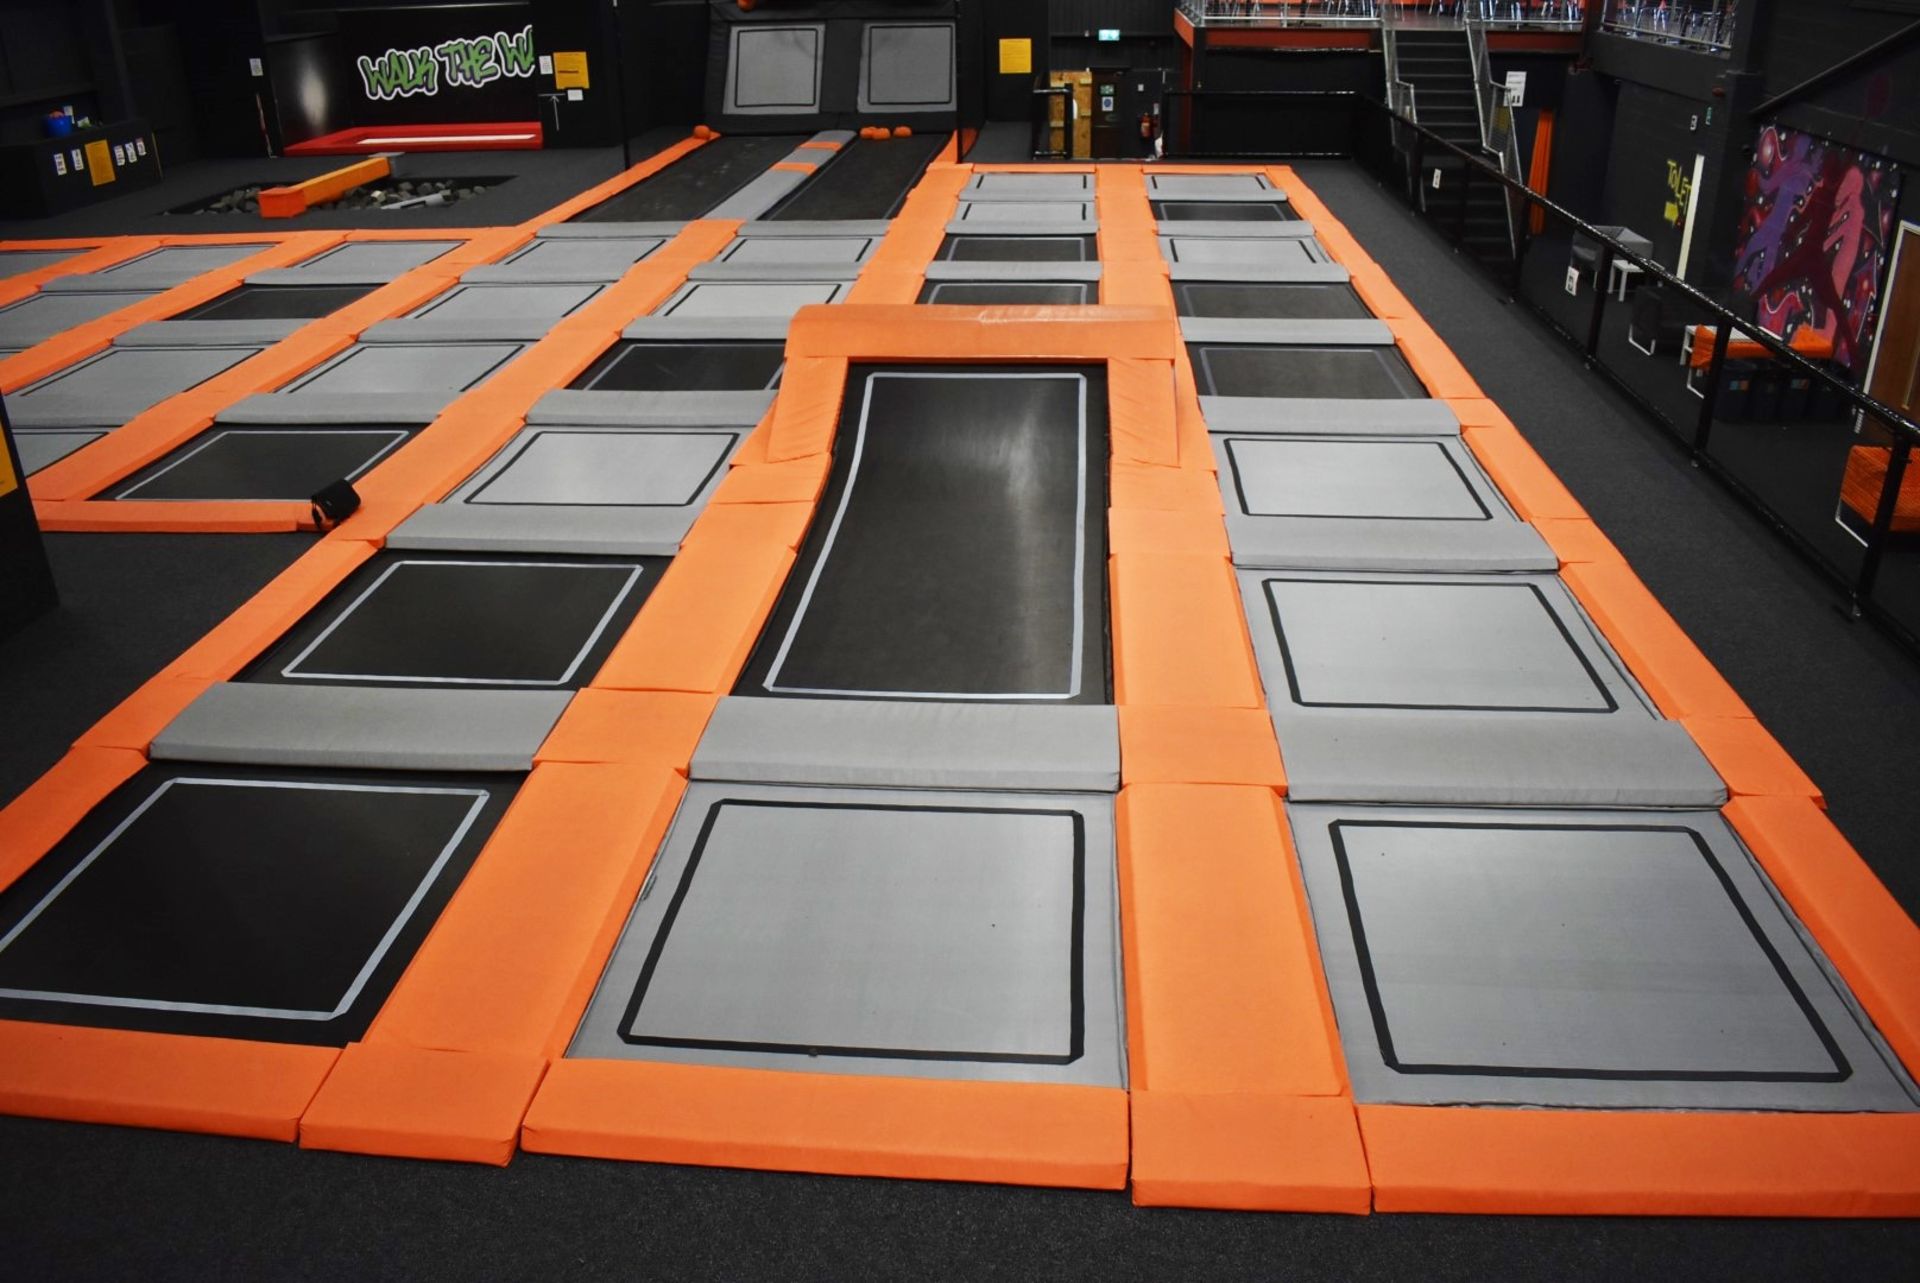 1 x Large Trampoline Park - Disassembled - Includes Dodgeball Arena And Jump Tower - CL766  - - Image 16 of 99